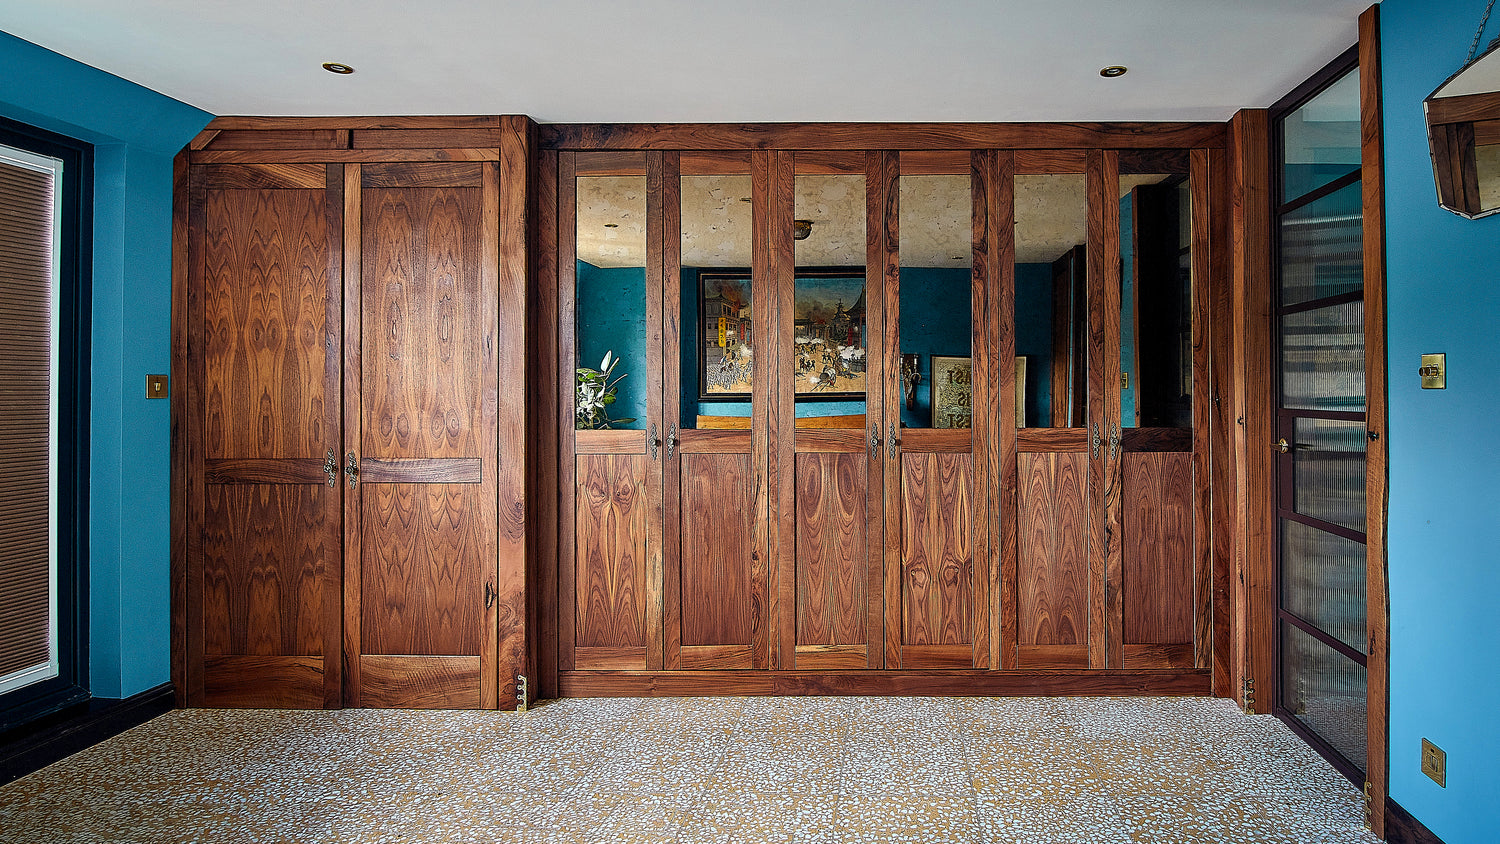 Live Edge Creations presents a luxurious and stylish fitted wardrobe crafted in black walnut wood, exuding sophistication and elegance. With ample space to store your clothing, the stylish wardrobe enhances the room's appeal with mirrored doors and Black Walnut accents.